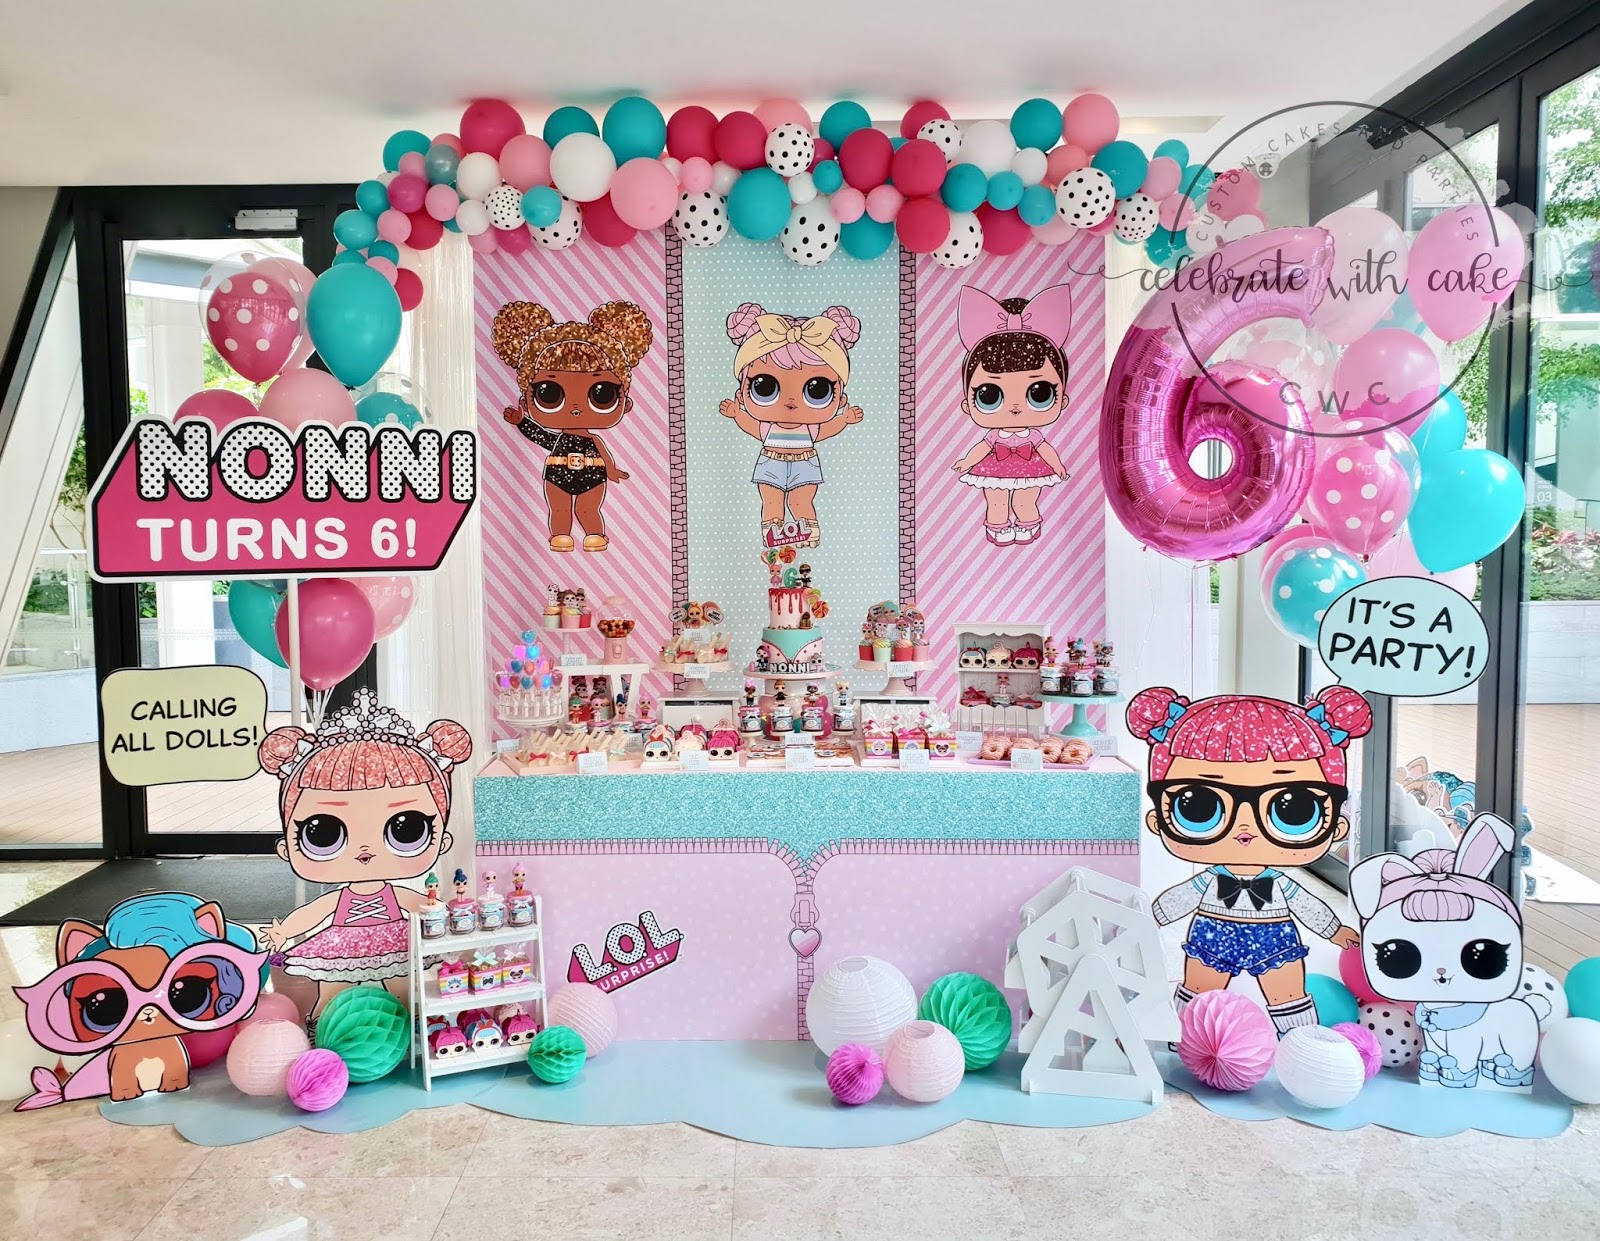 Celebrate with Cake!: LOL Dolls themed dessert table (Please click on